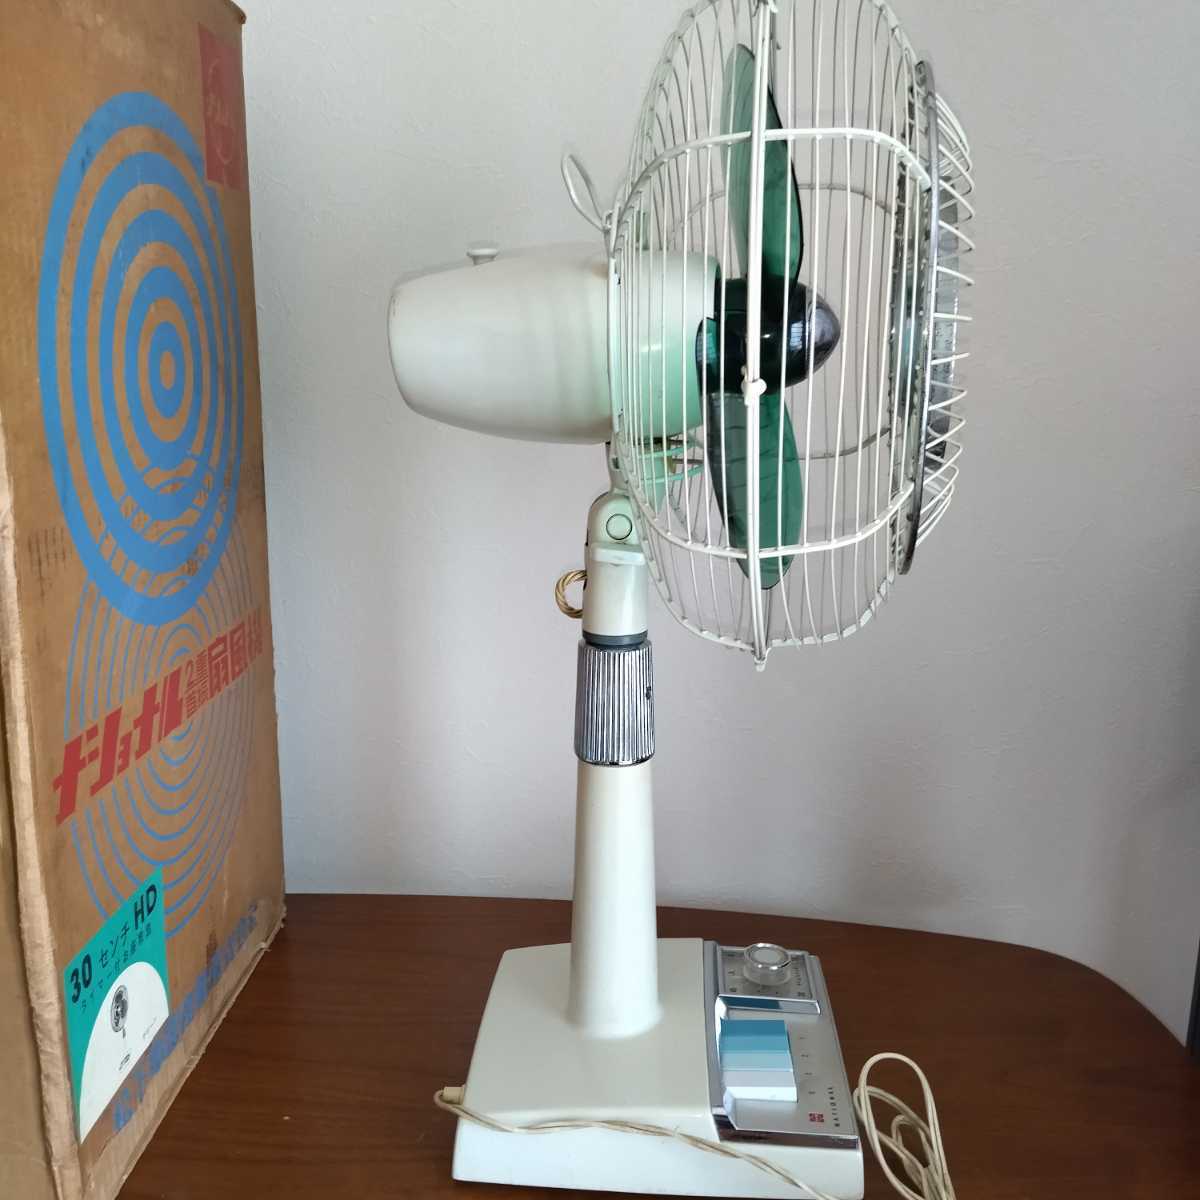 * operation verification settled retro electric fan NATIONAL ELECTRIC FAN 30HD National Matsushita electro- vessel 30cm Showa Retro electric fan retro consumer electronics 2 -ply neck . timer attaching 